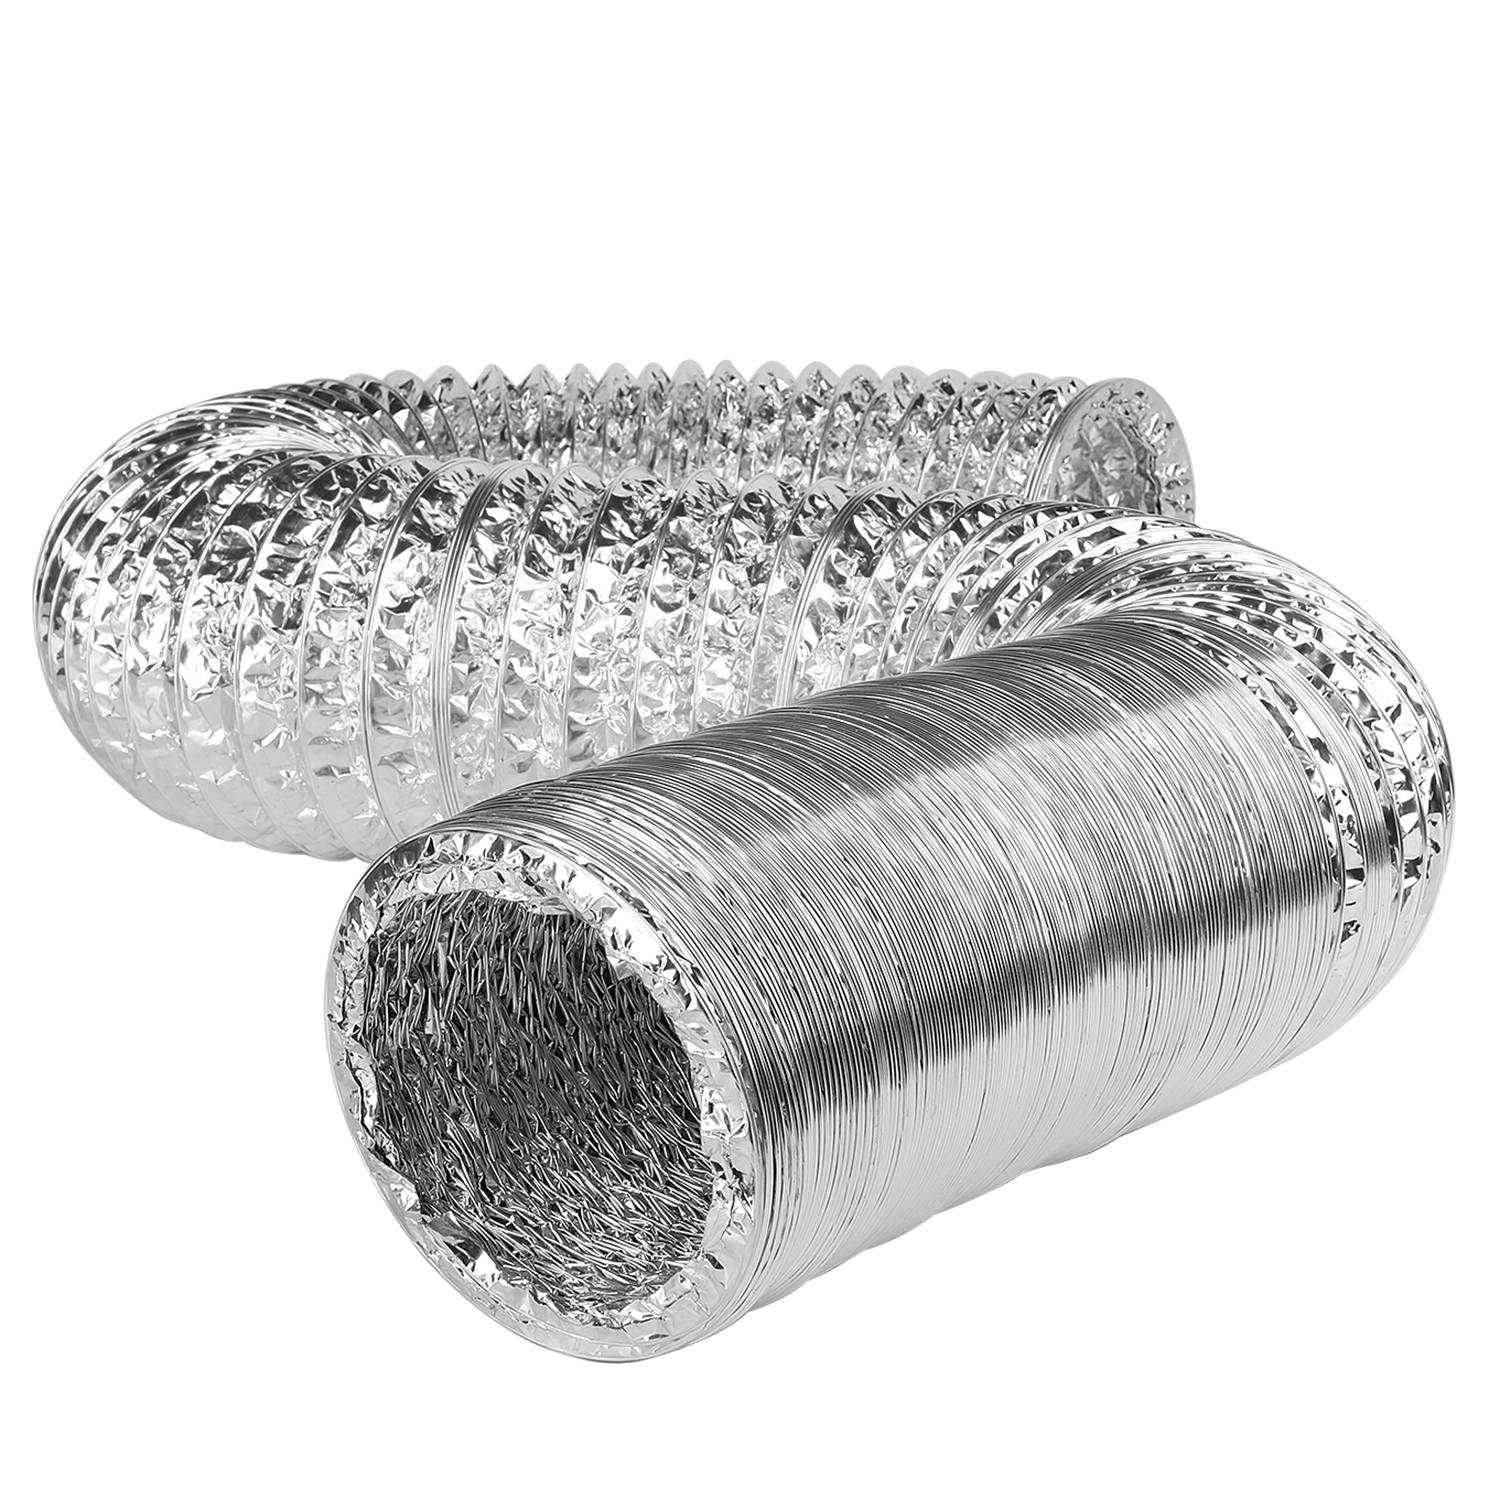 Aluminum Ducting Dryer Vent Hose (6" Inch, 25FT) Flexible Non-Insulated